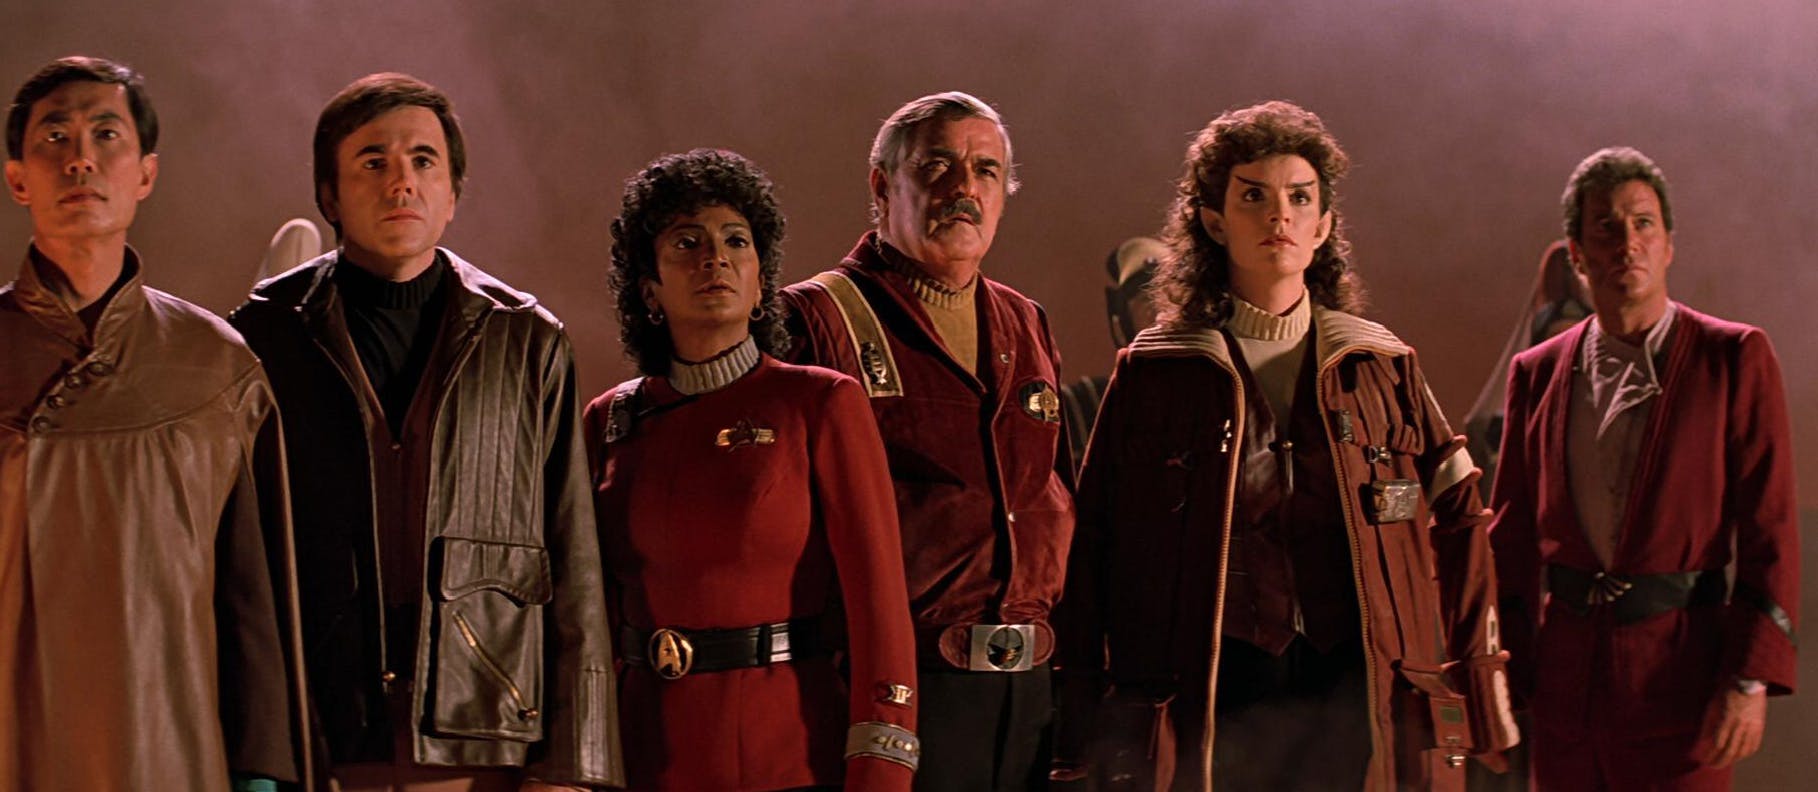 Standing in a row, Sulu, Chekov, Uhura, Chekov, Saavik, and Kirk, all look ahead of them with curiosity and intensity in Star Trek III: The Search for Spock